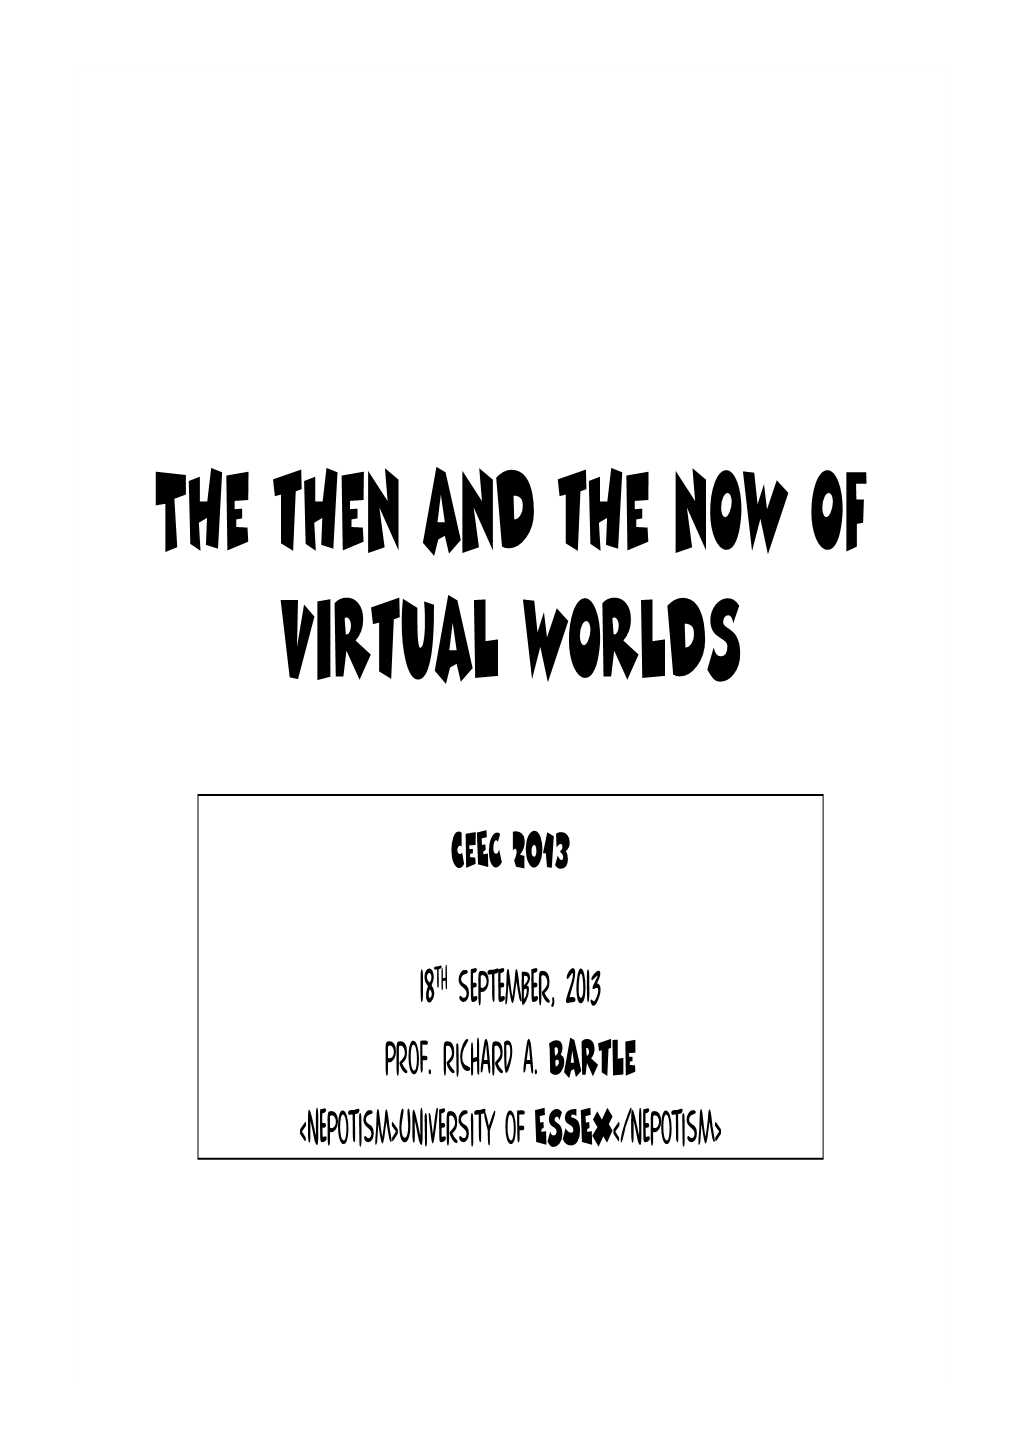 The Then and the Now of Virtual Worlds